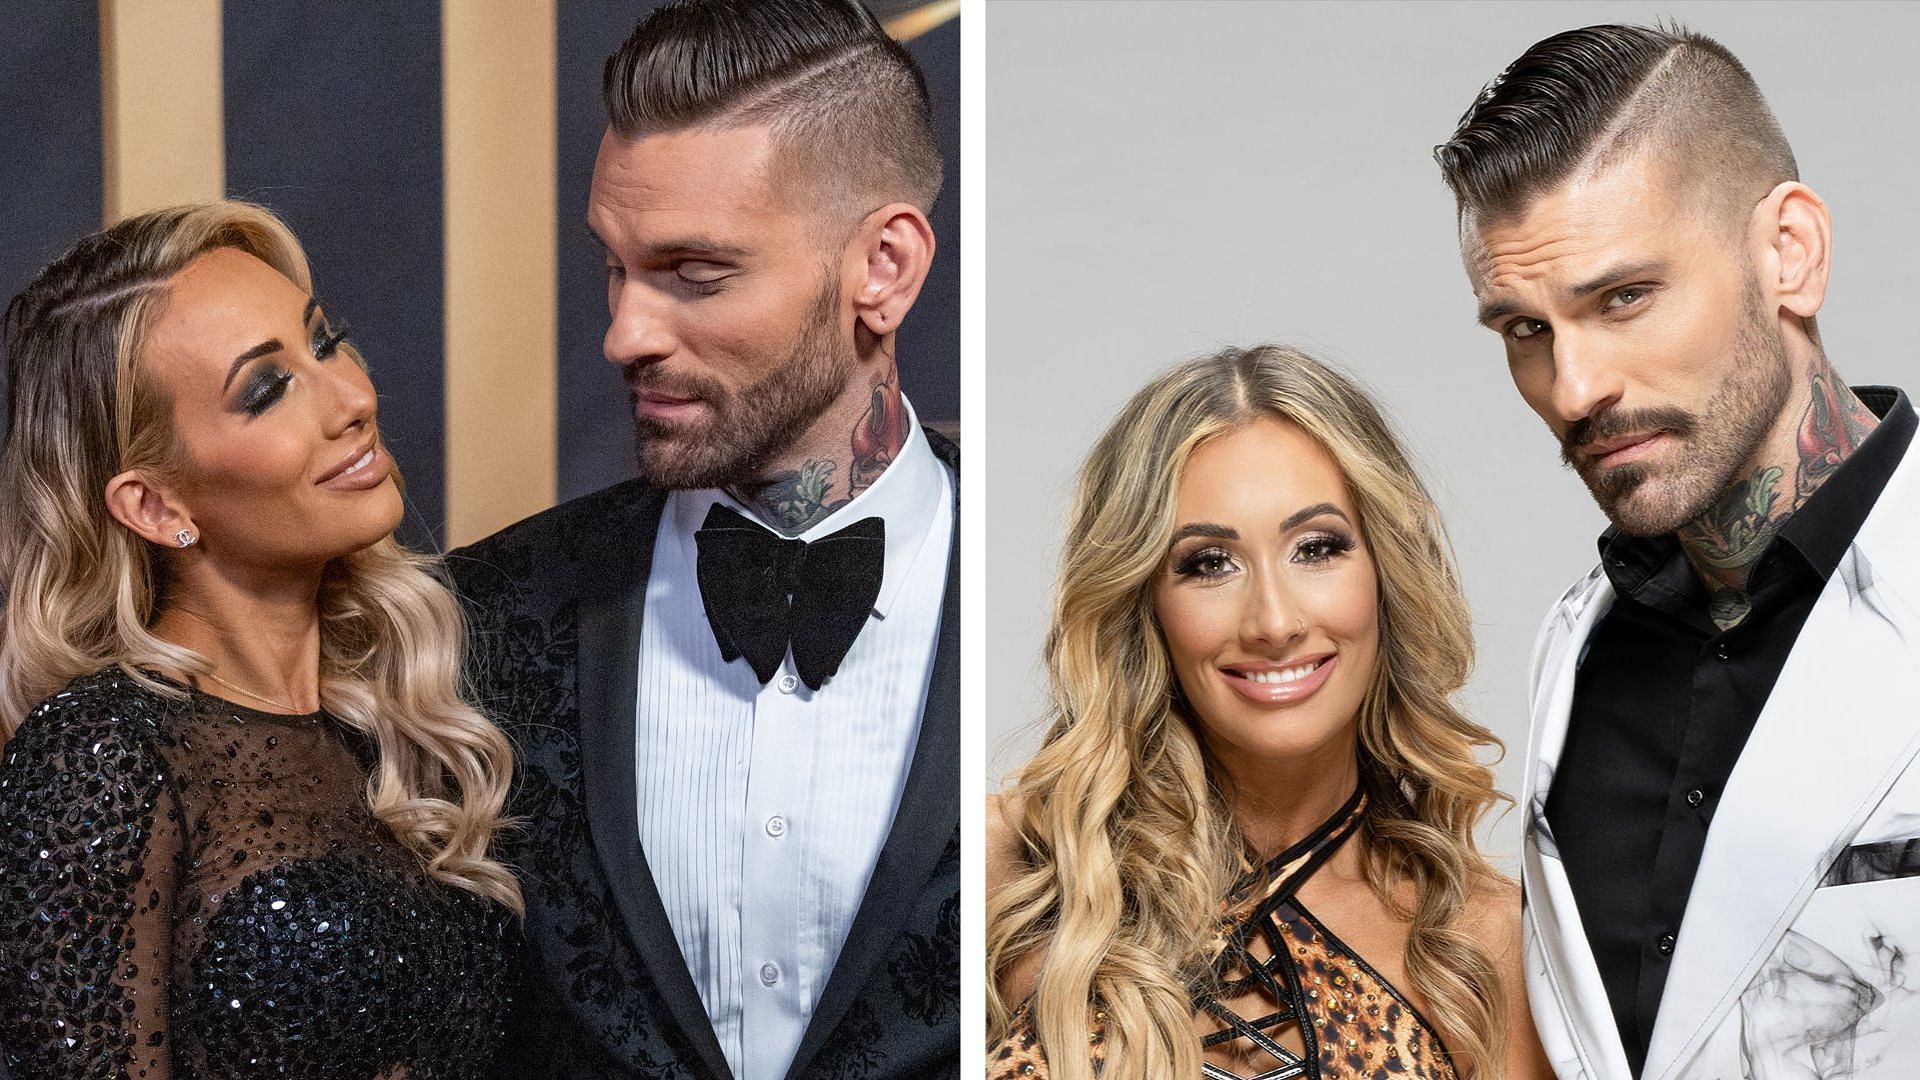 Corey Graves and Carmella could potentially team up together in WWE